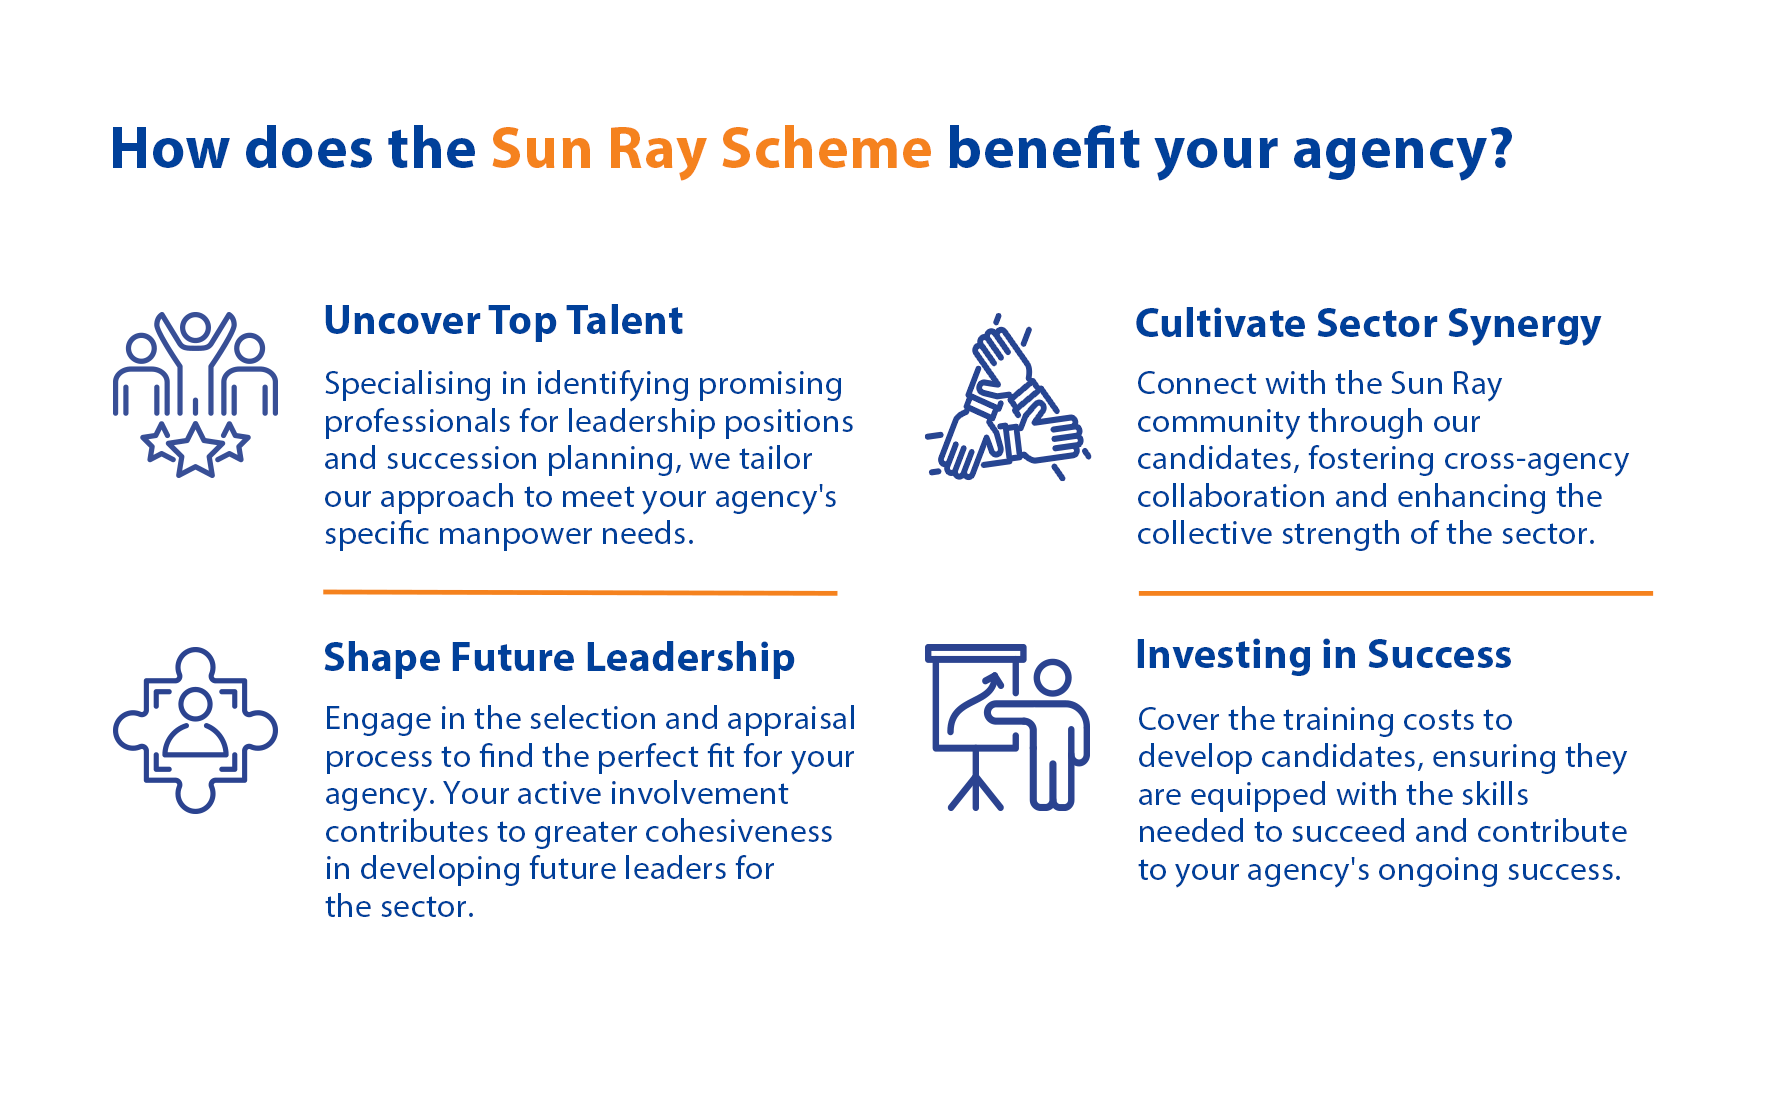 How does the Sun Ray Scheme benefit your agency?